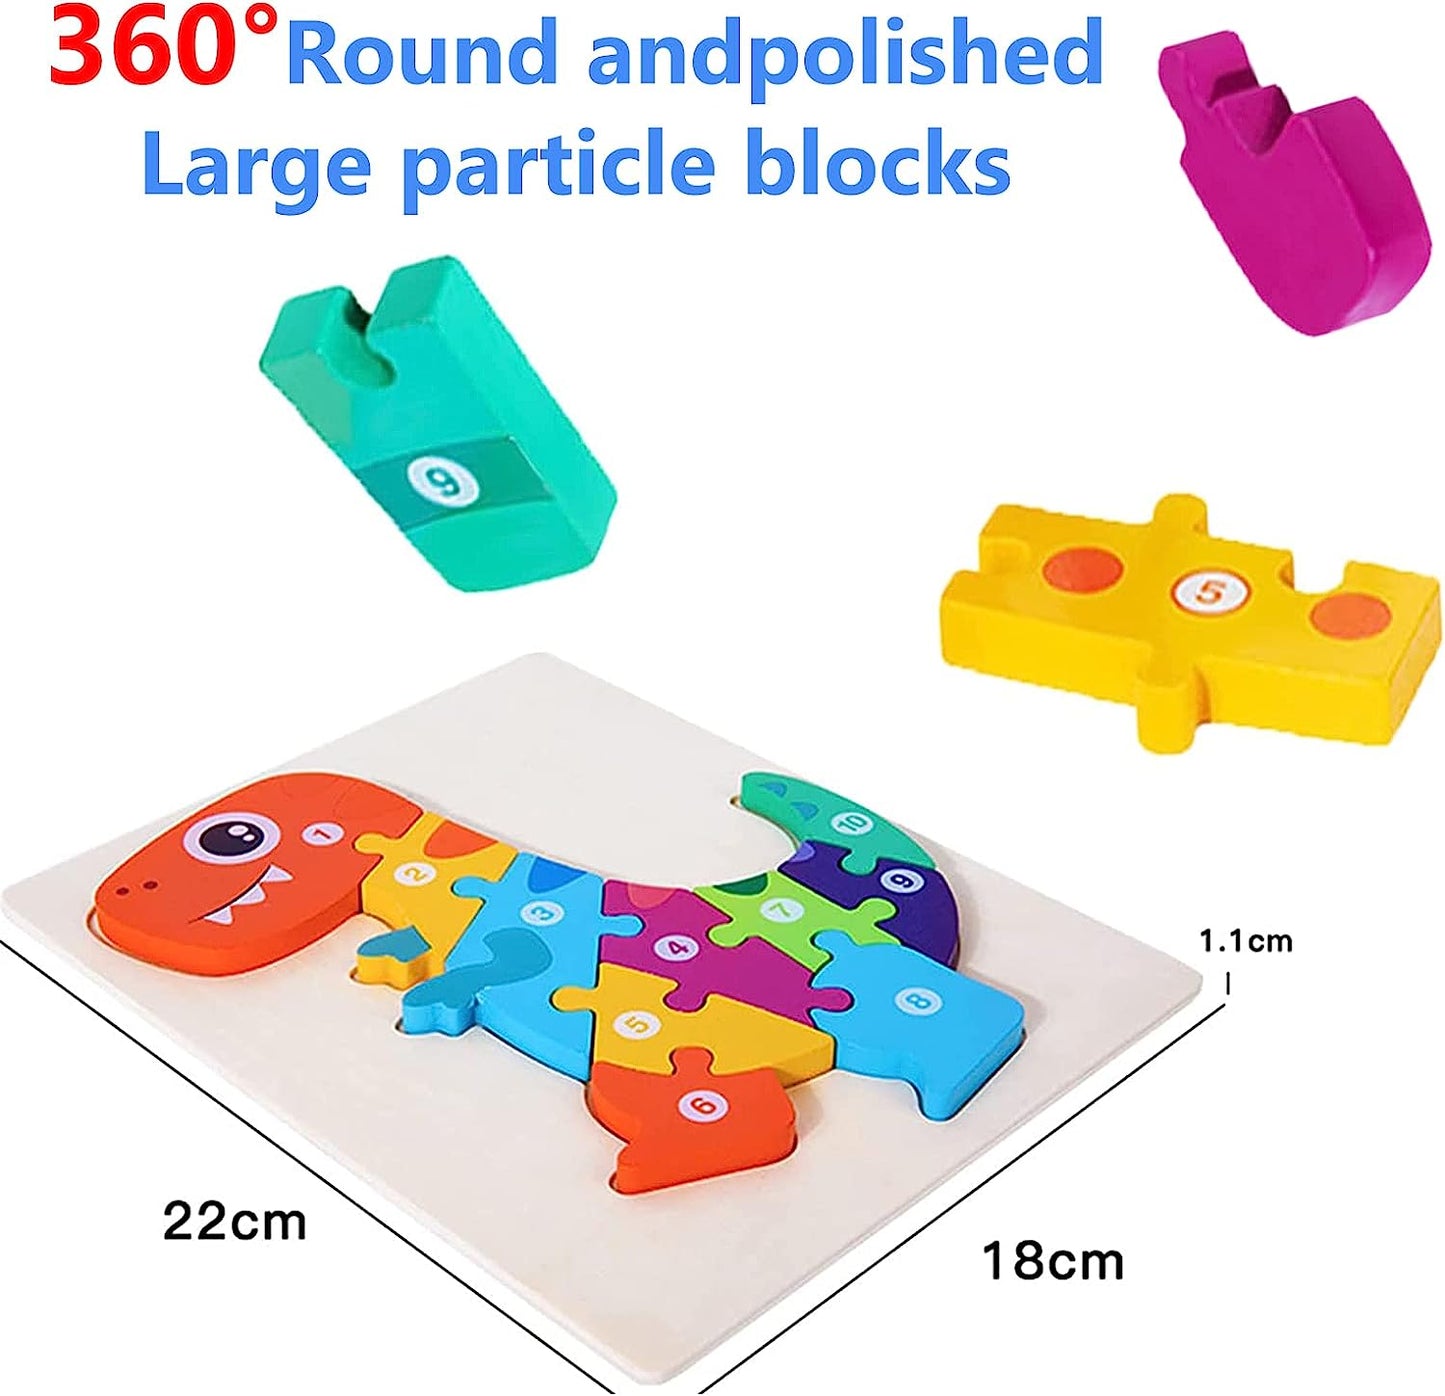 Wooden Toddler Puzzles for Kids Toys for 1 2 3 Years Old Boys Girls, 4-Pack Standing Animal Jigsaw Puzzle Gift Wooden Dinosaur Puzzles Numbers Colors Shapes Early Learning Educational Toys